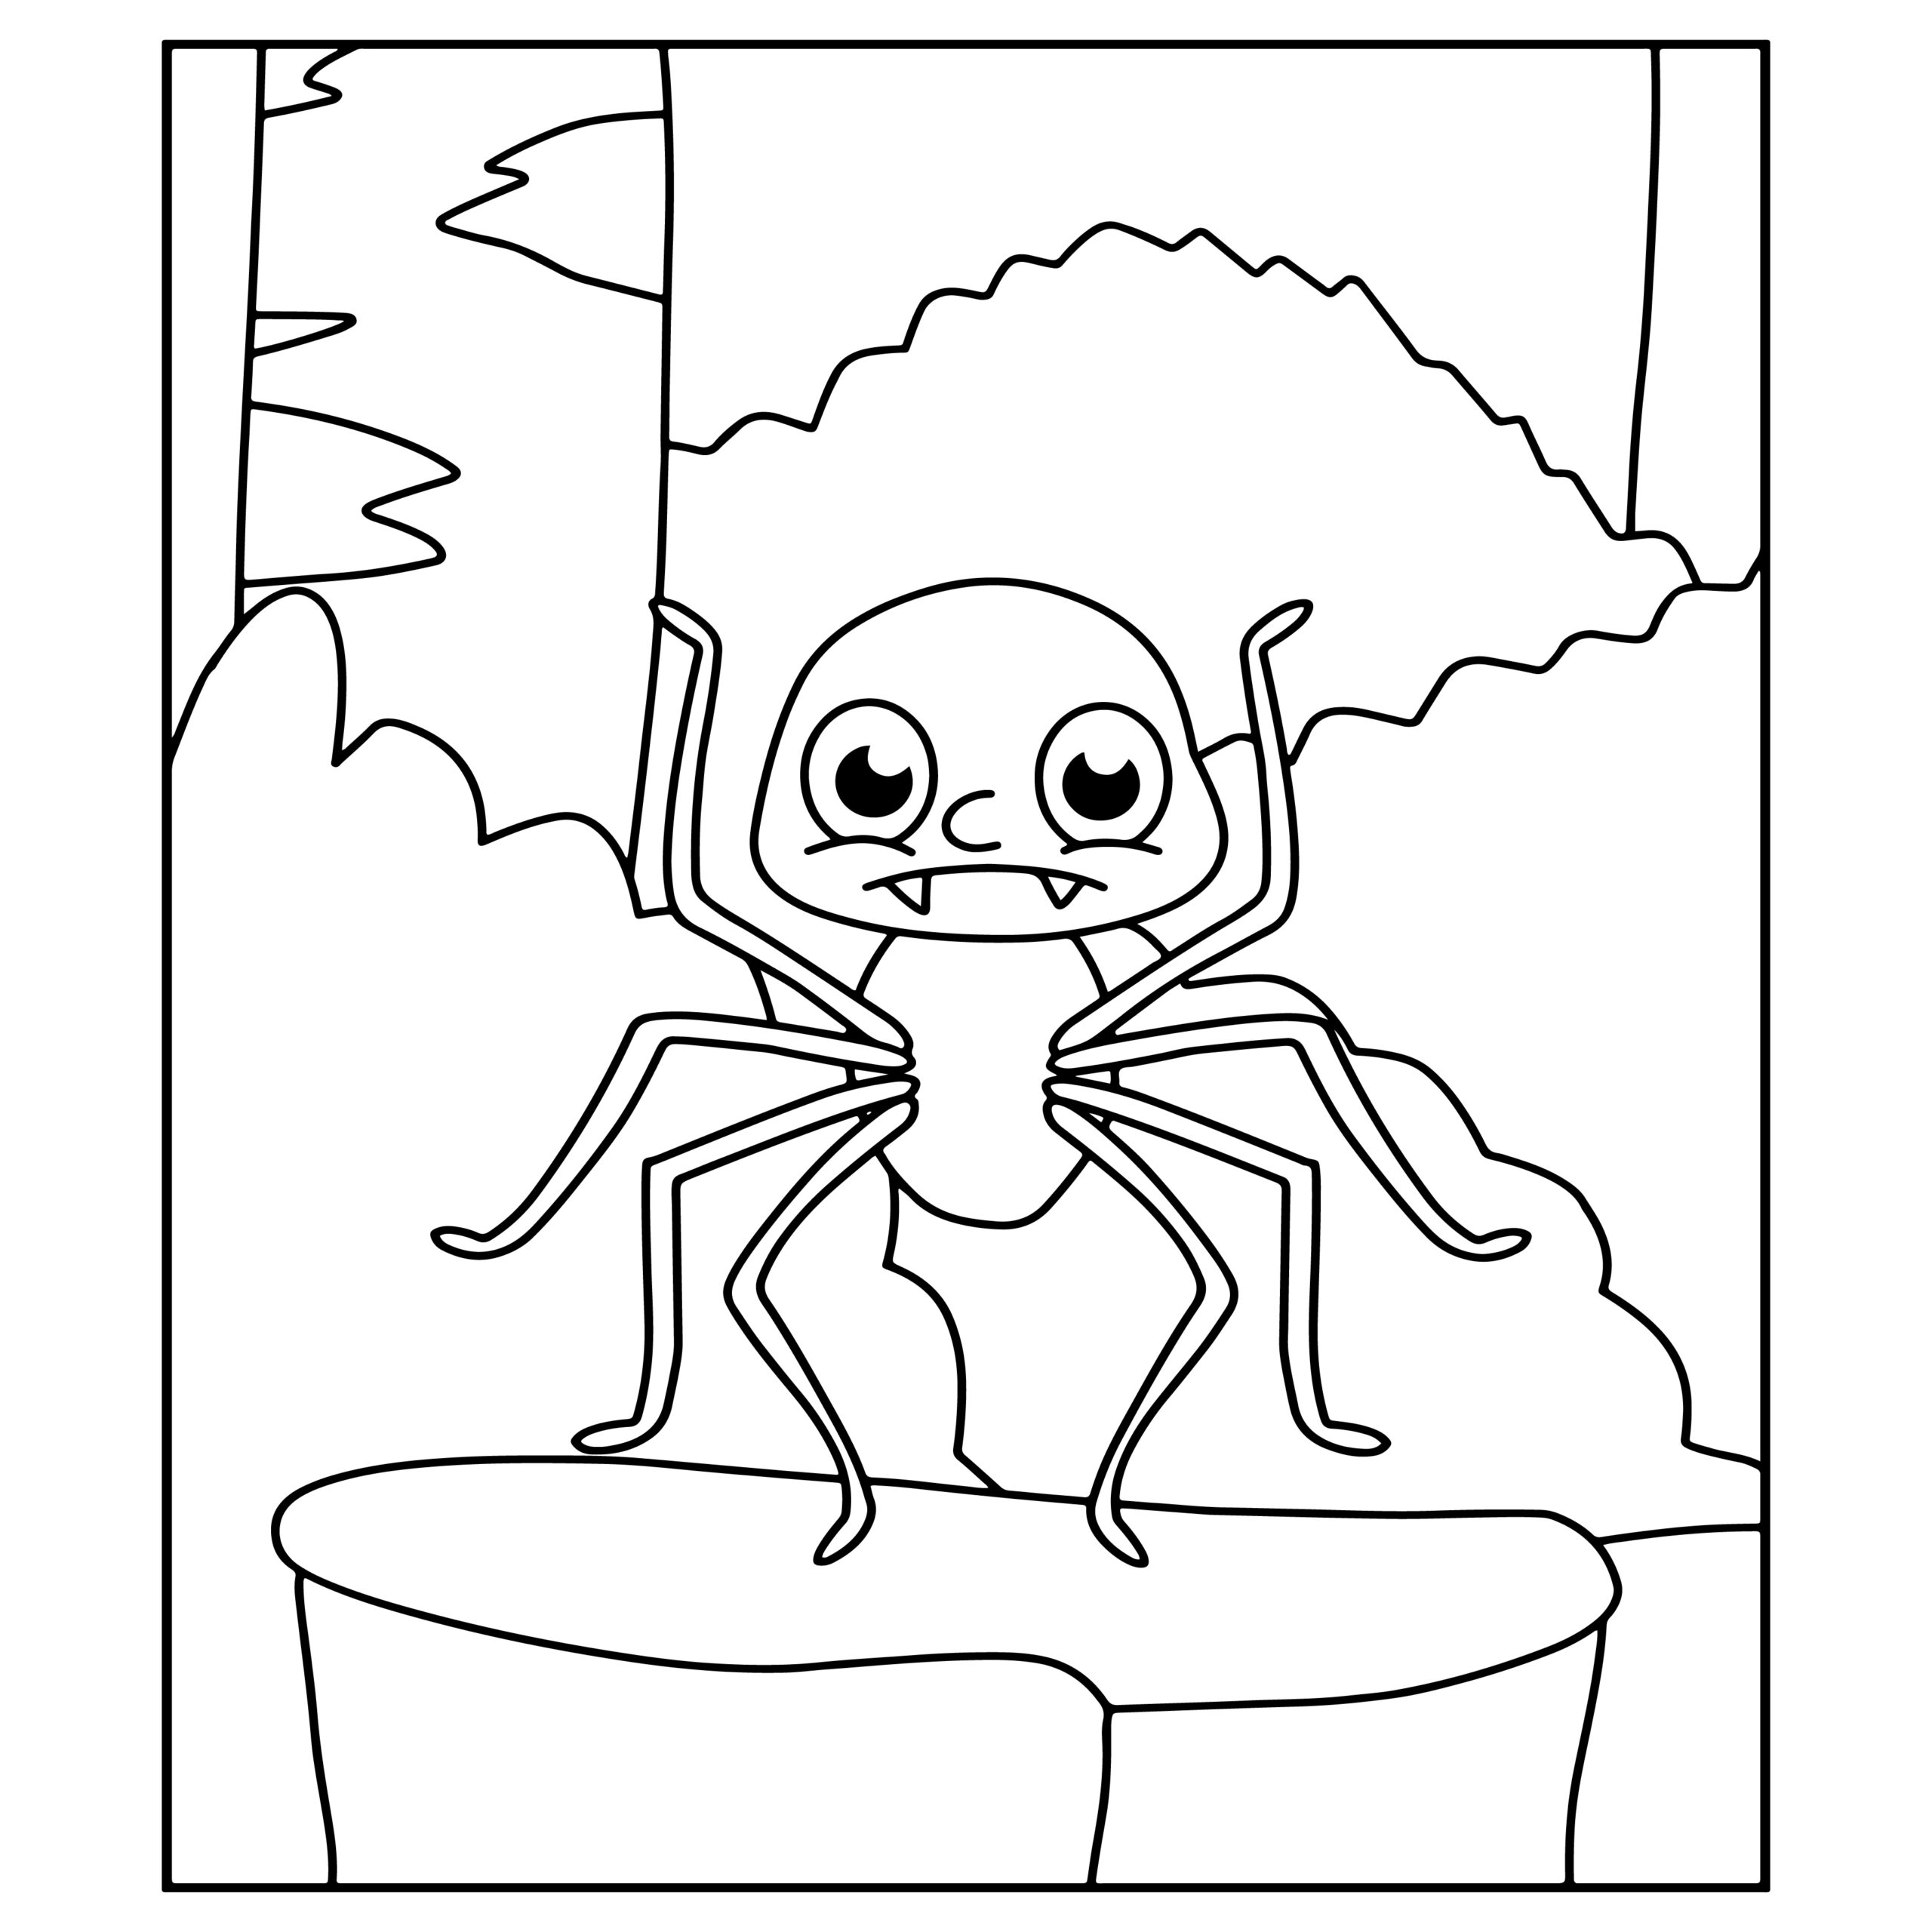 Spider coloring pages for kids spider coloring book made by teachers